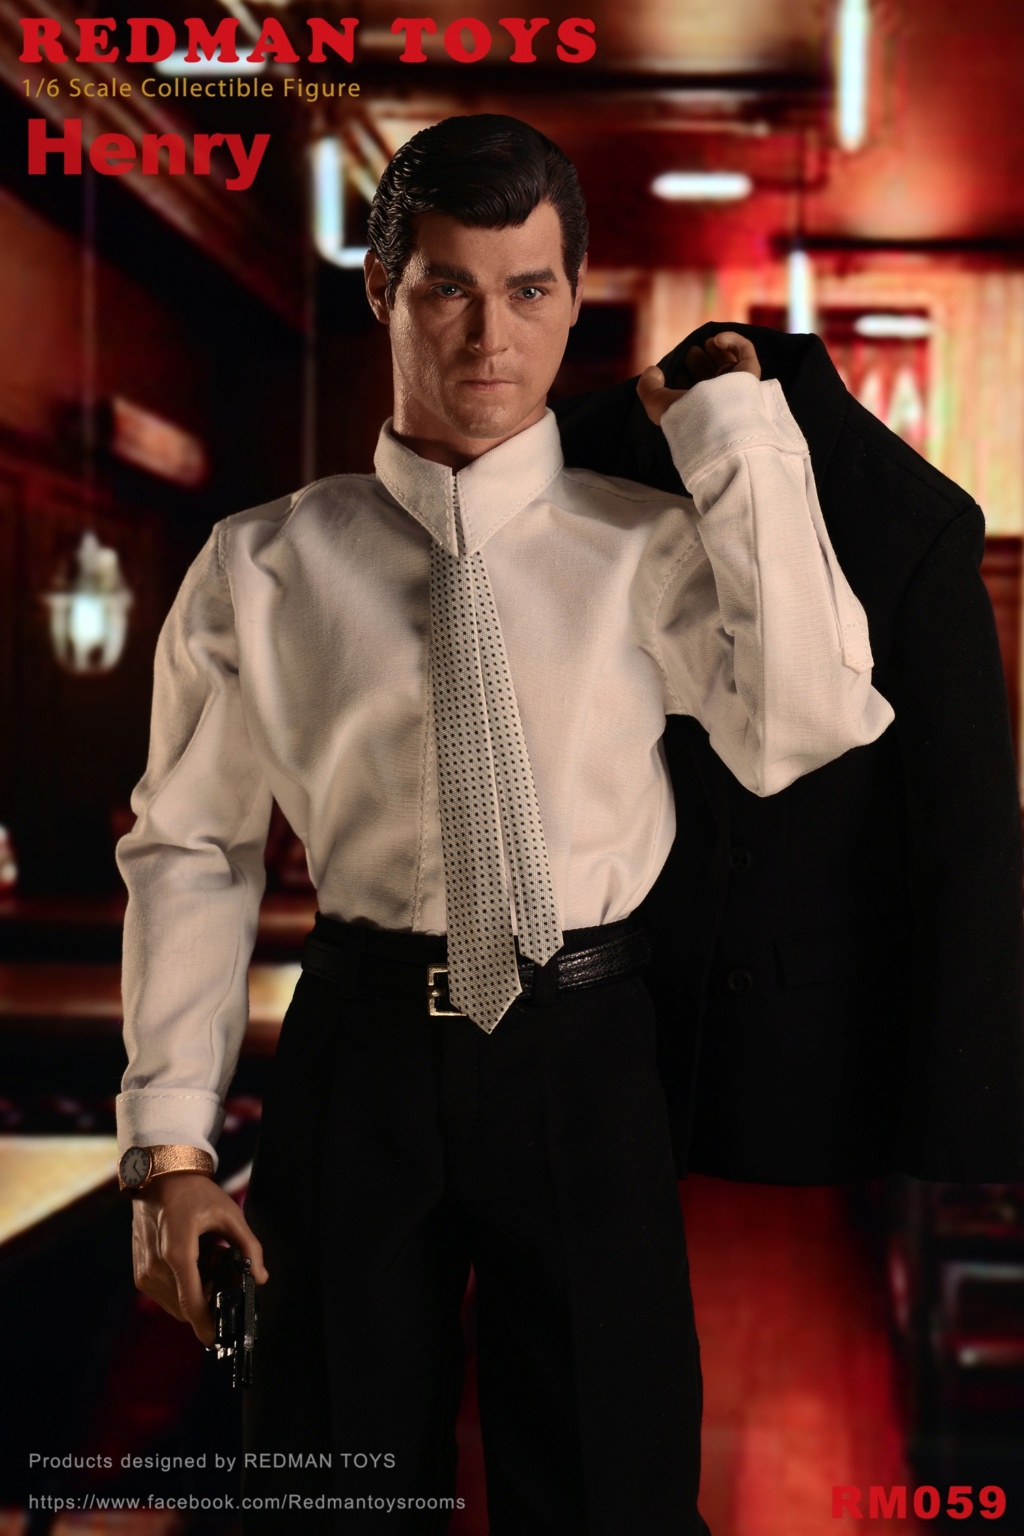 movie-based - NEW PRODUCT: Redman Toys: 1/6 Good Guys Threesome JIMMY TOMMY HENRY 15194611